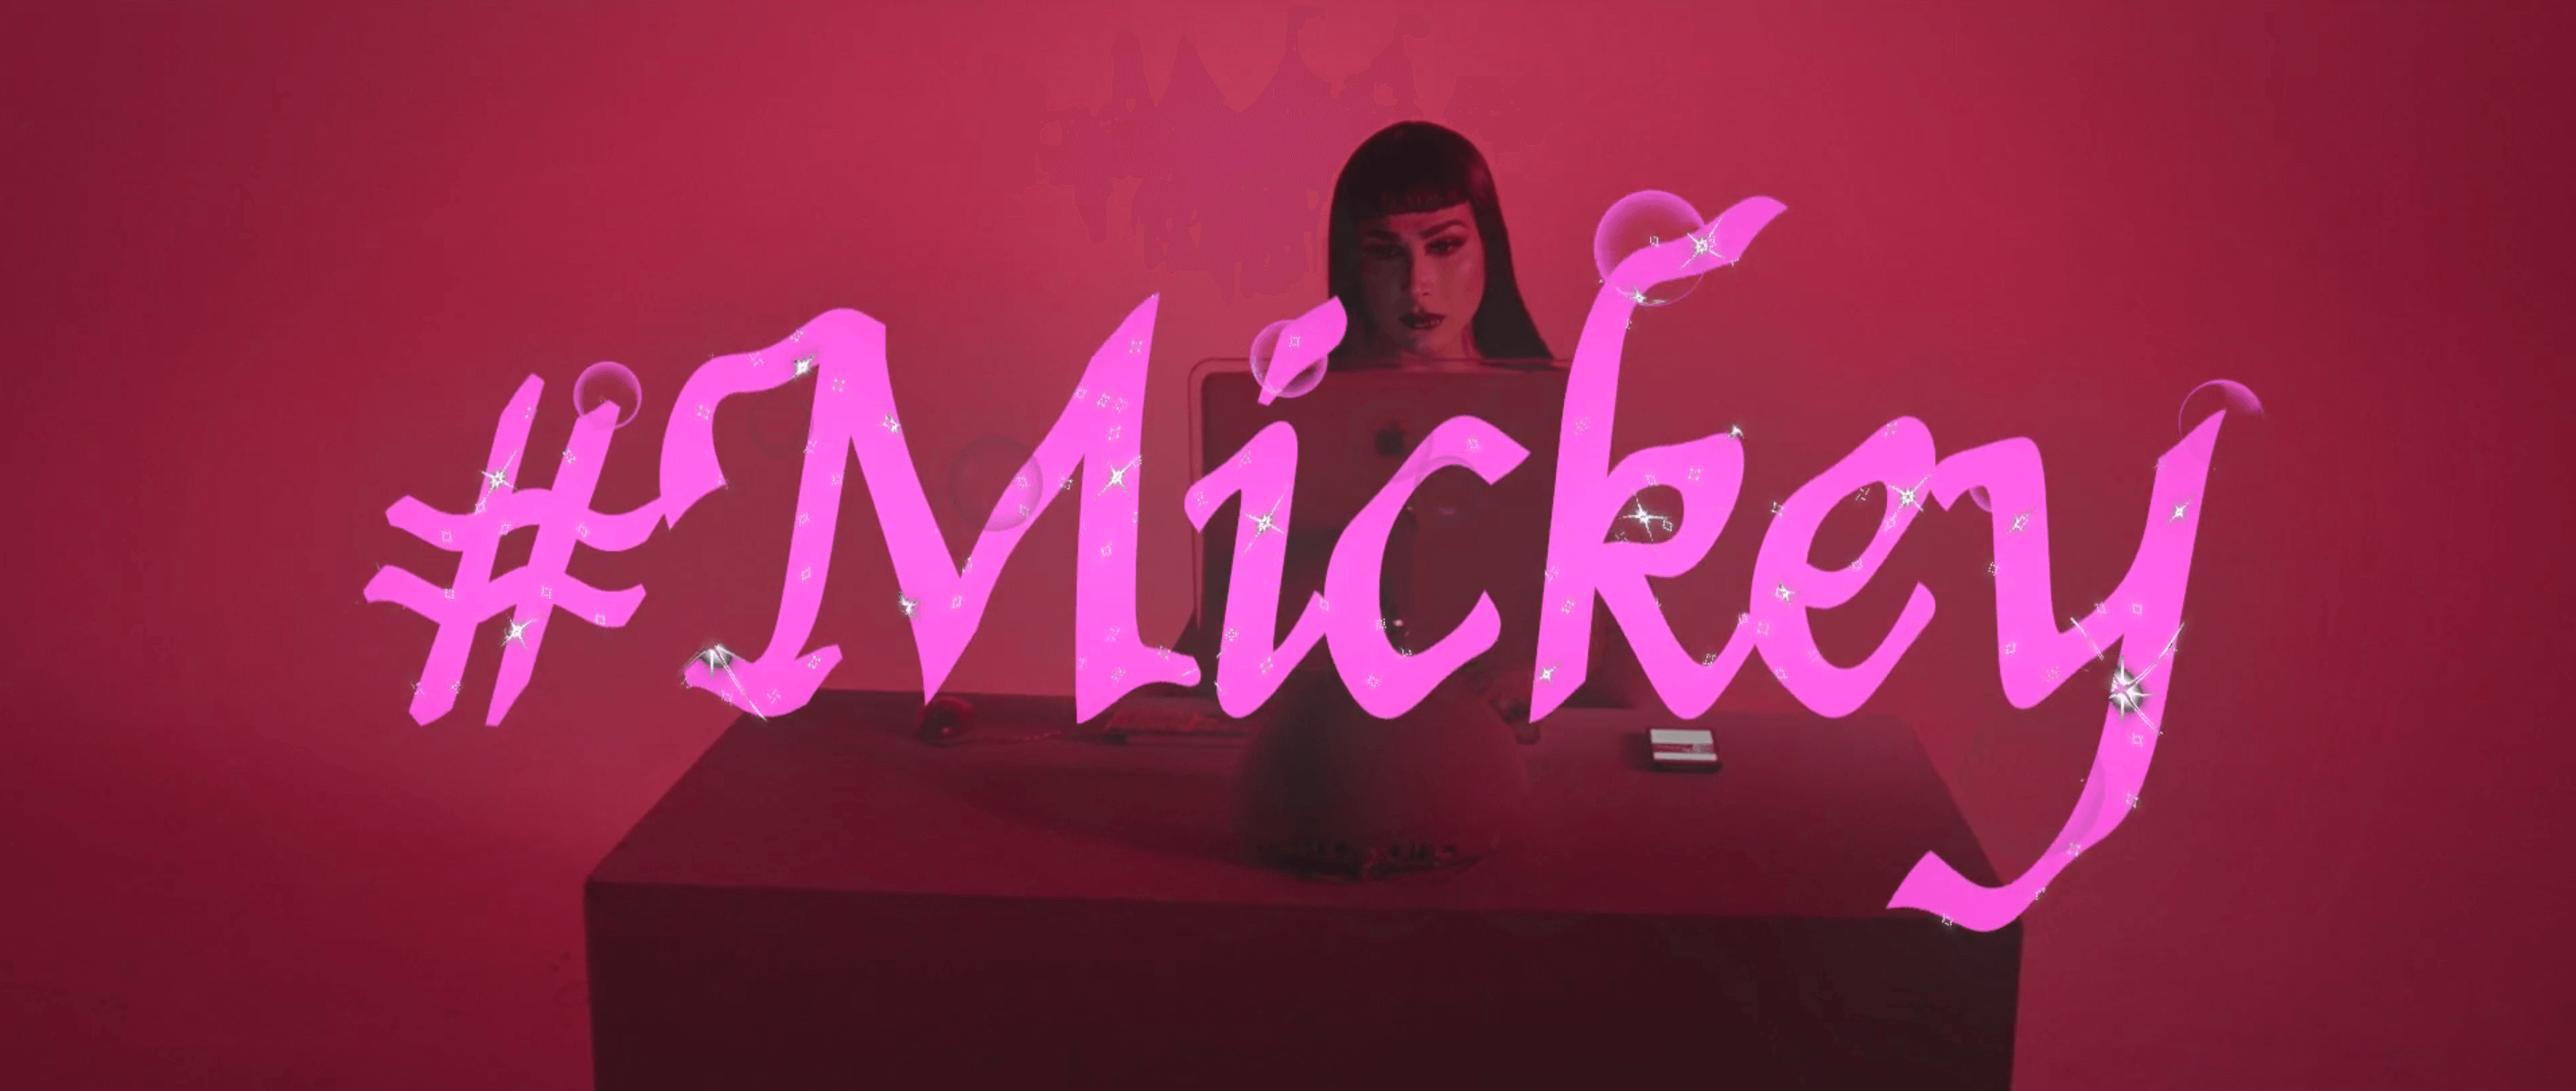 Still form #Mickey. A woman sits behind a desk with a computer screen and cell phone on it. The tile of the film, "#Mickey" overlays the image in pink with sparkles.